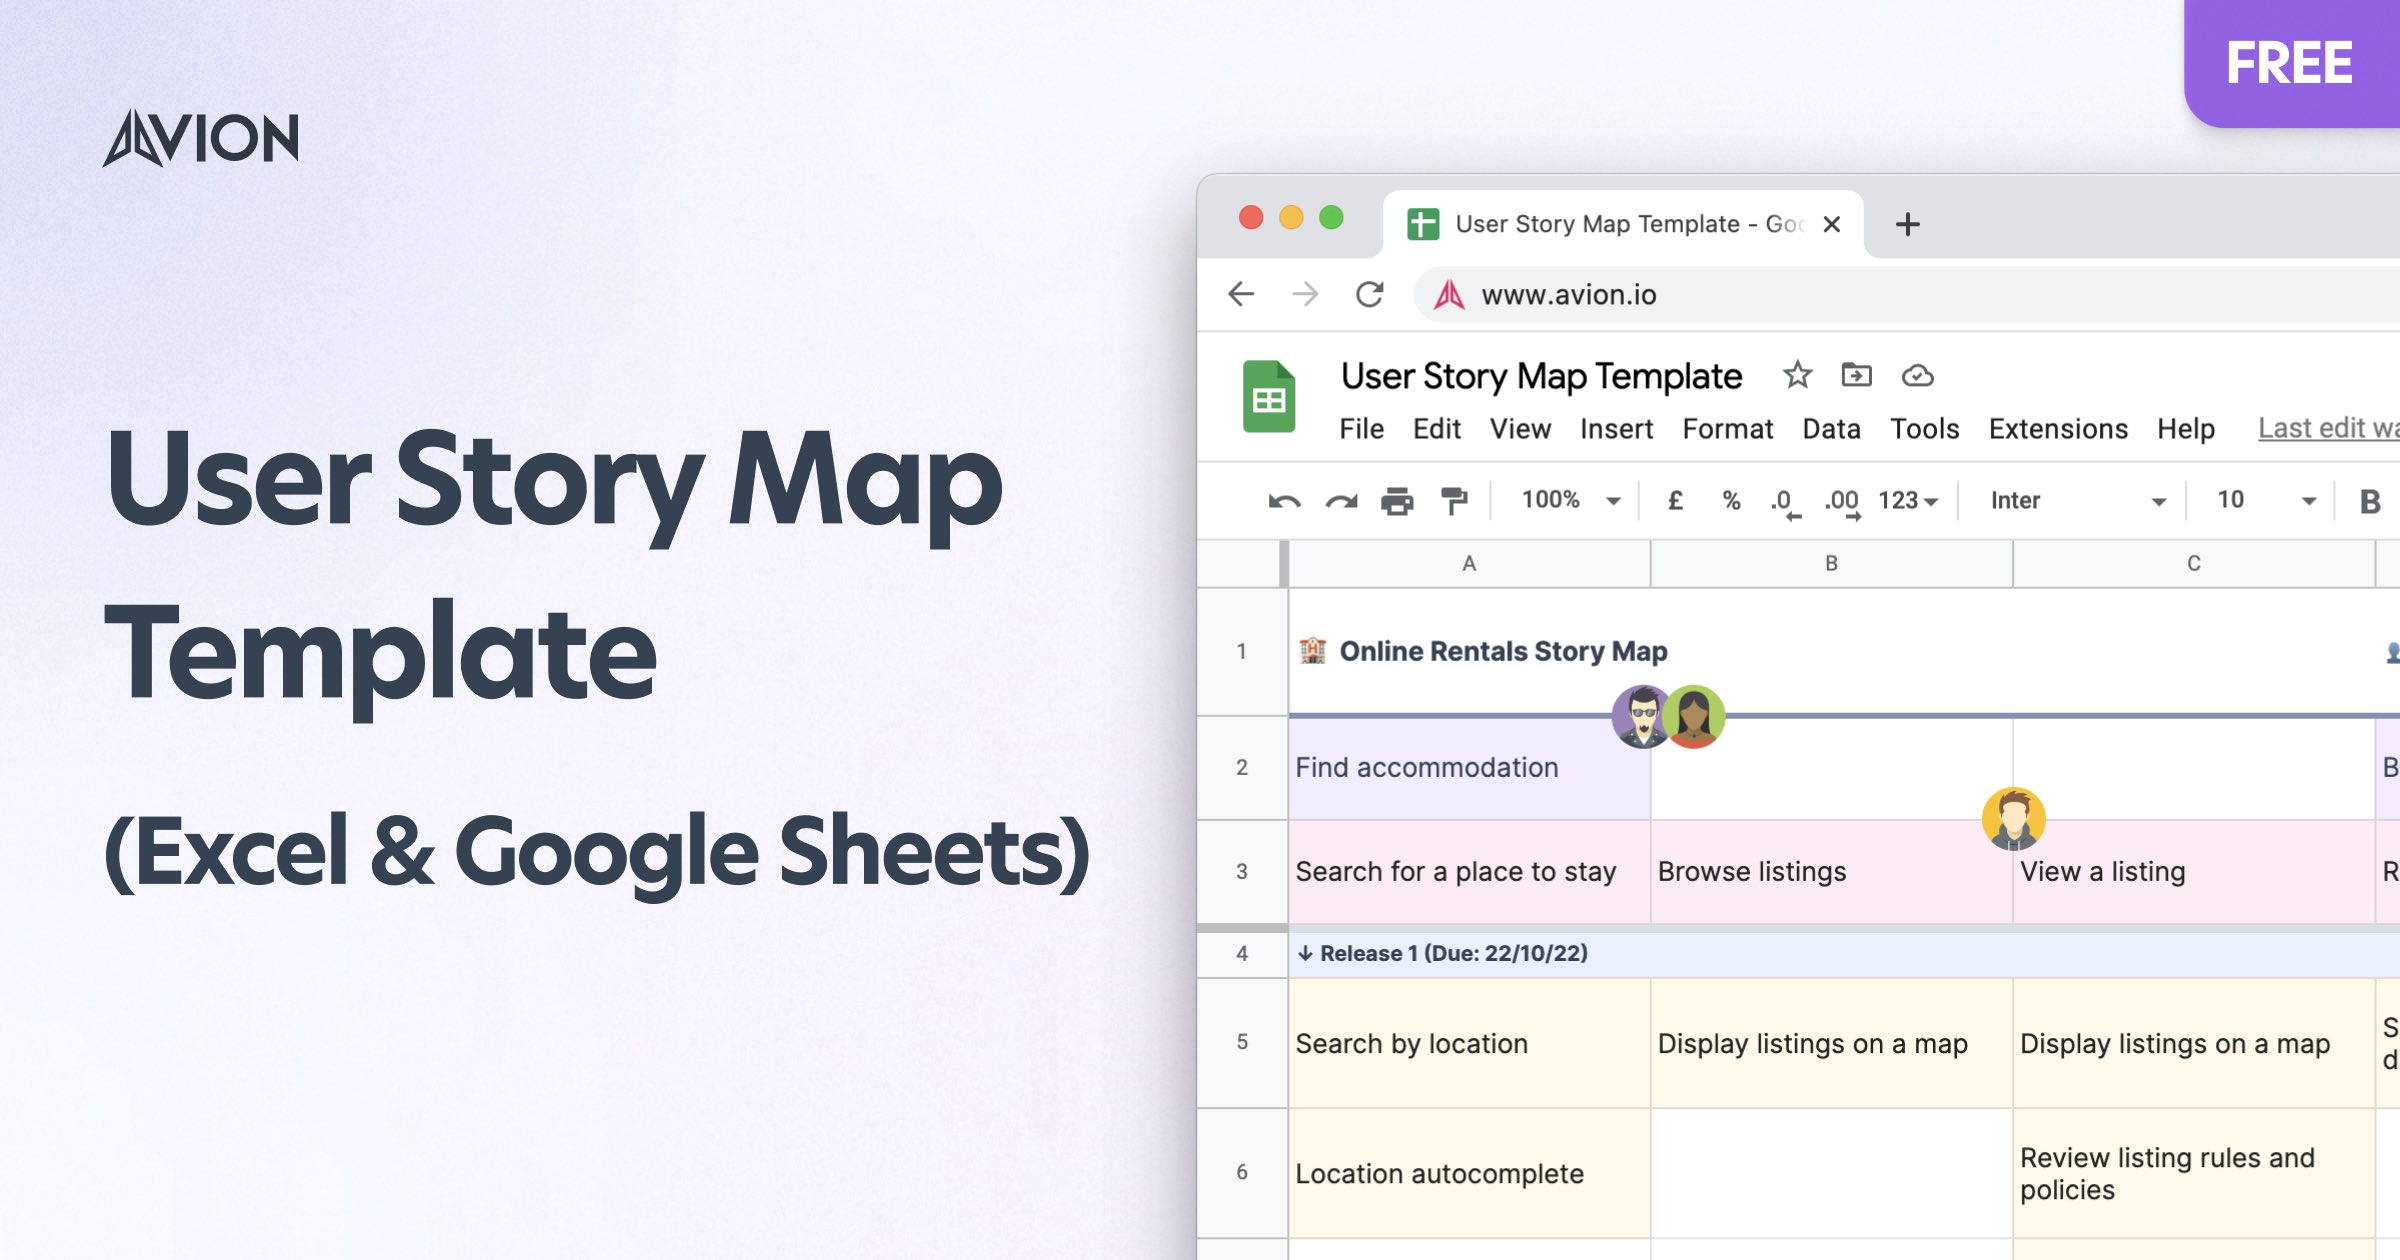 [Free] User Story Mapping Template (Excel & Google Sheets)